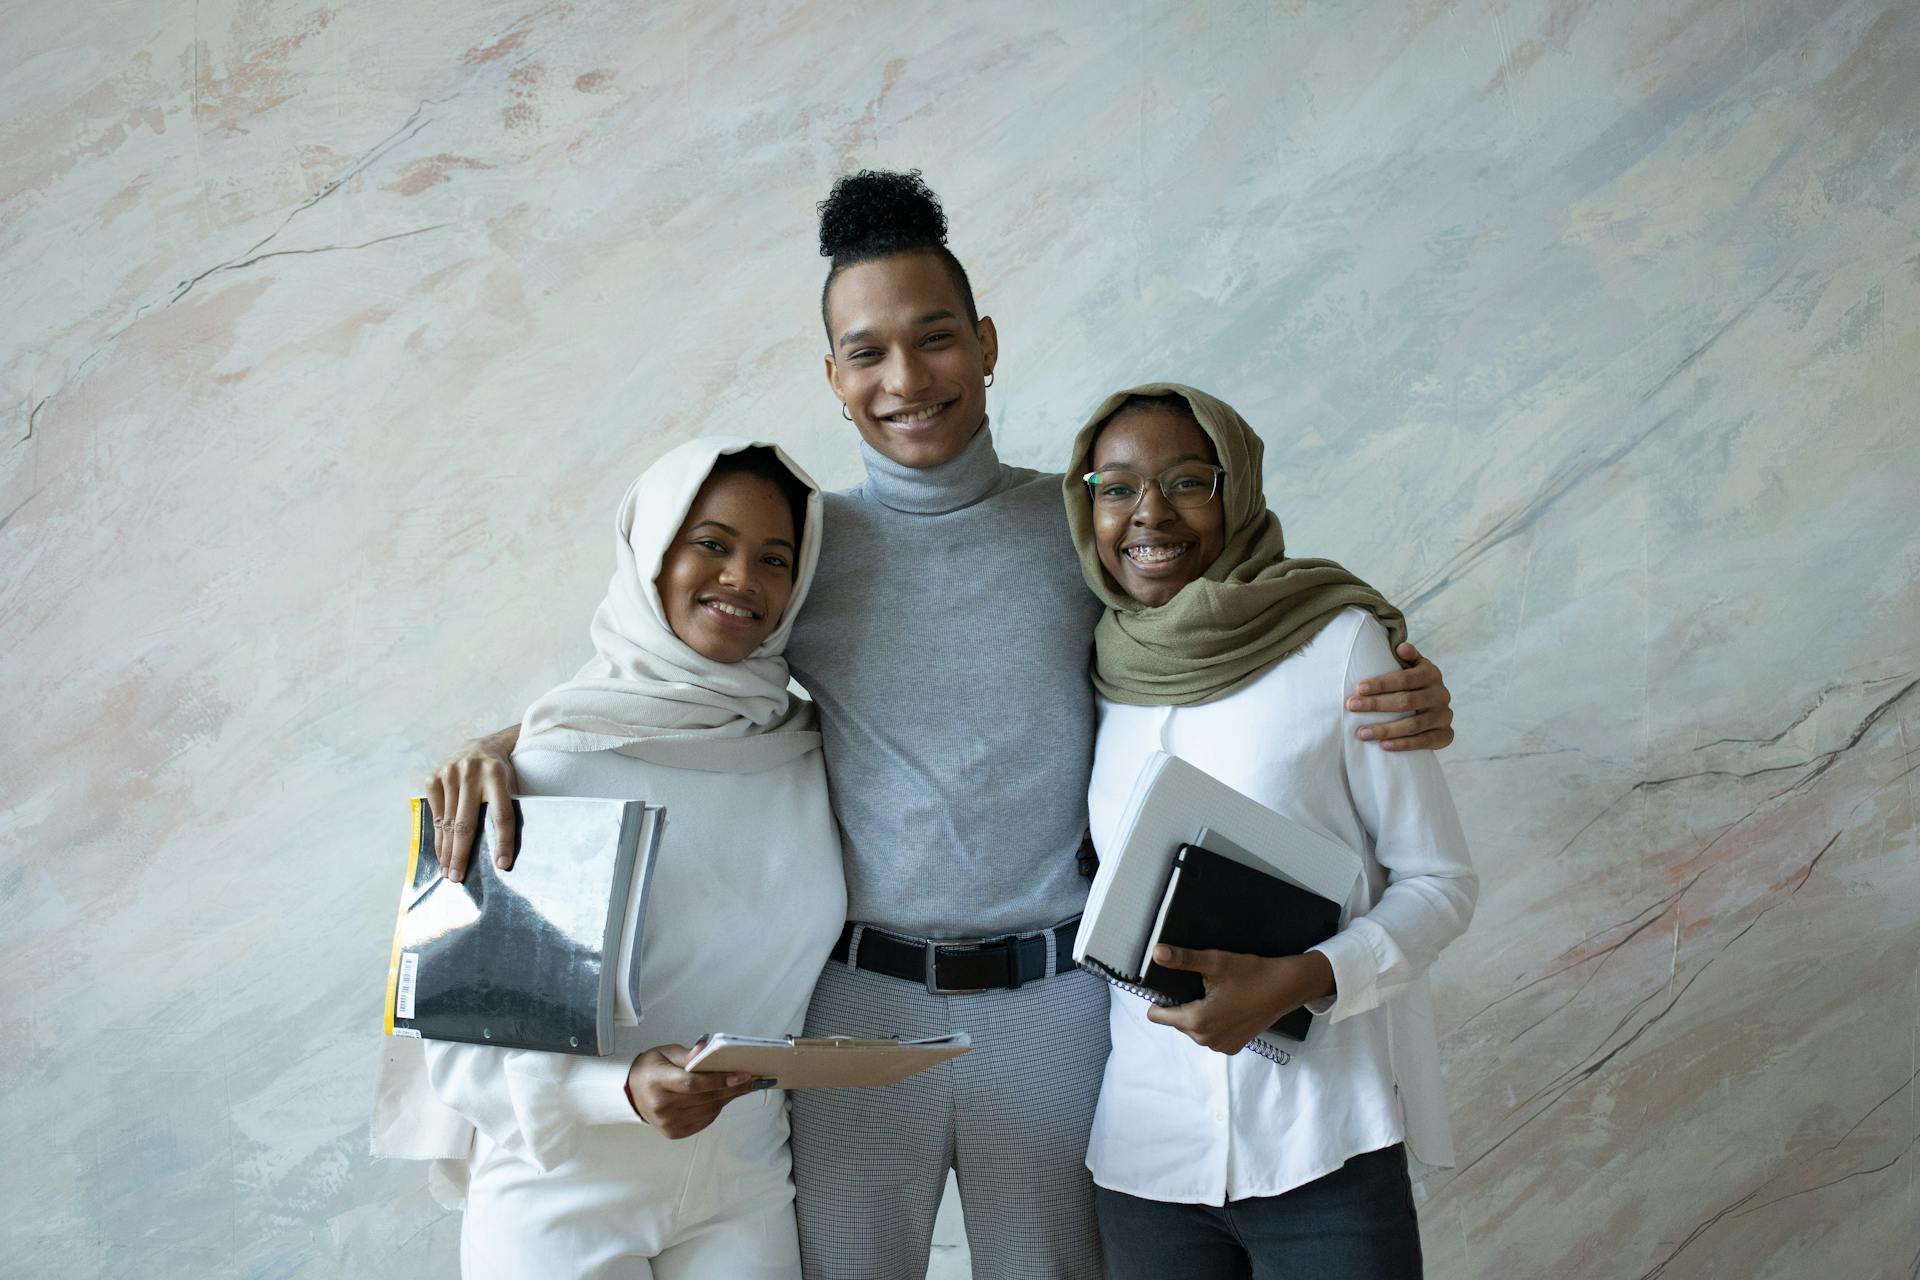 Two women and a man all in semi-professional attire smile for the camera in a relaxed group half-hug while holding business documents.